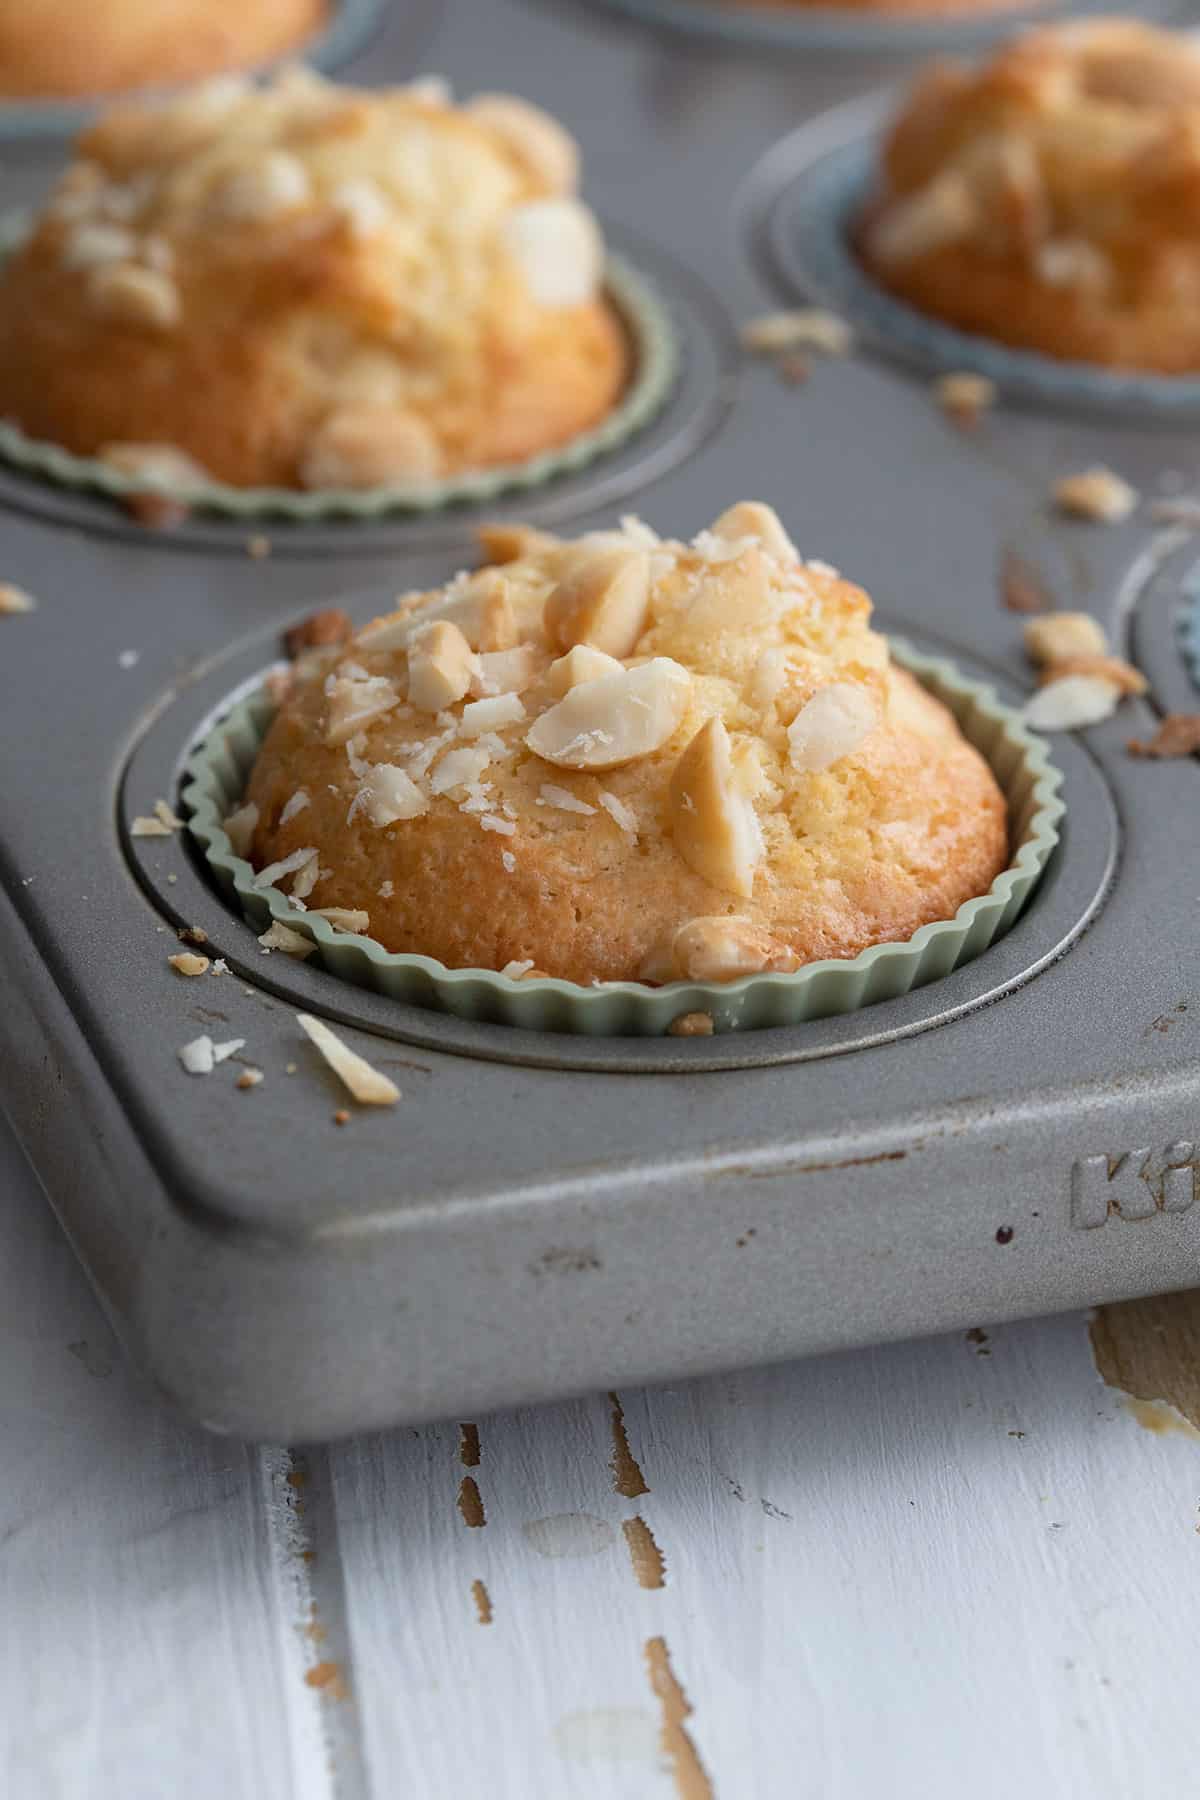 Freshly baked macadamia nut muffins in the muffin pan.